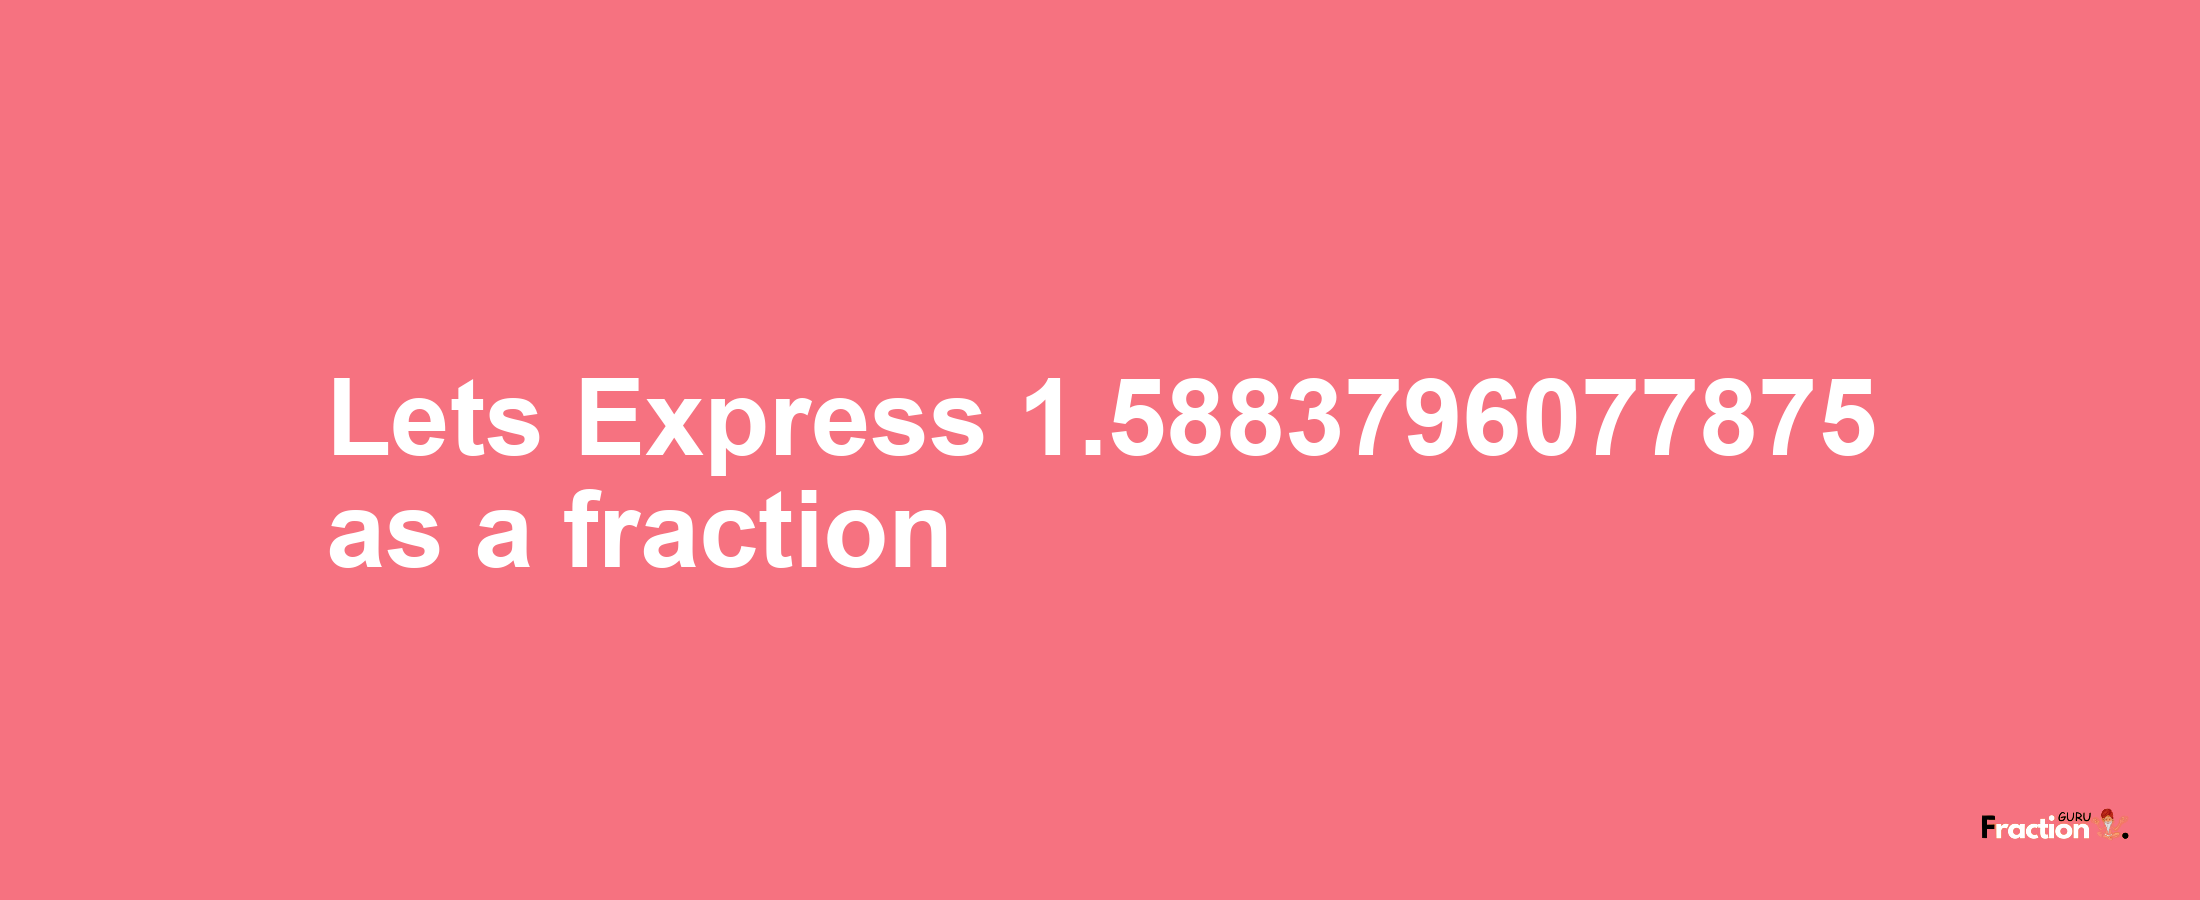 Lets Express 1.5883796077875 as afraction